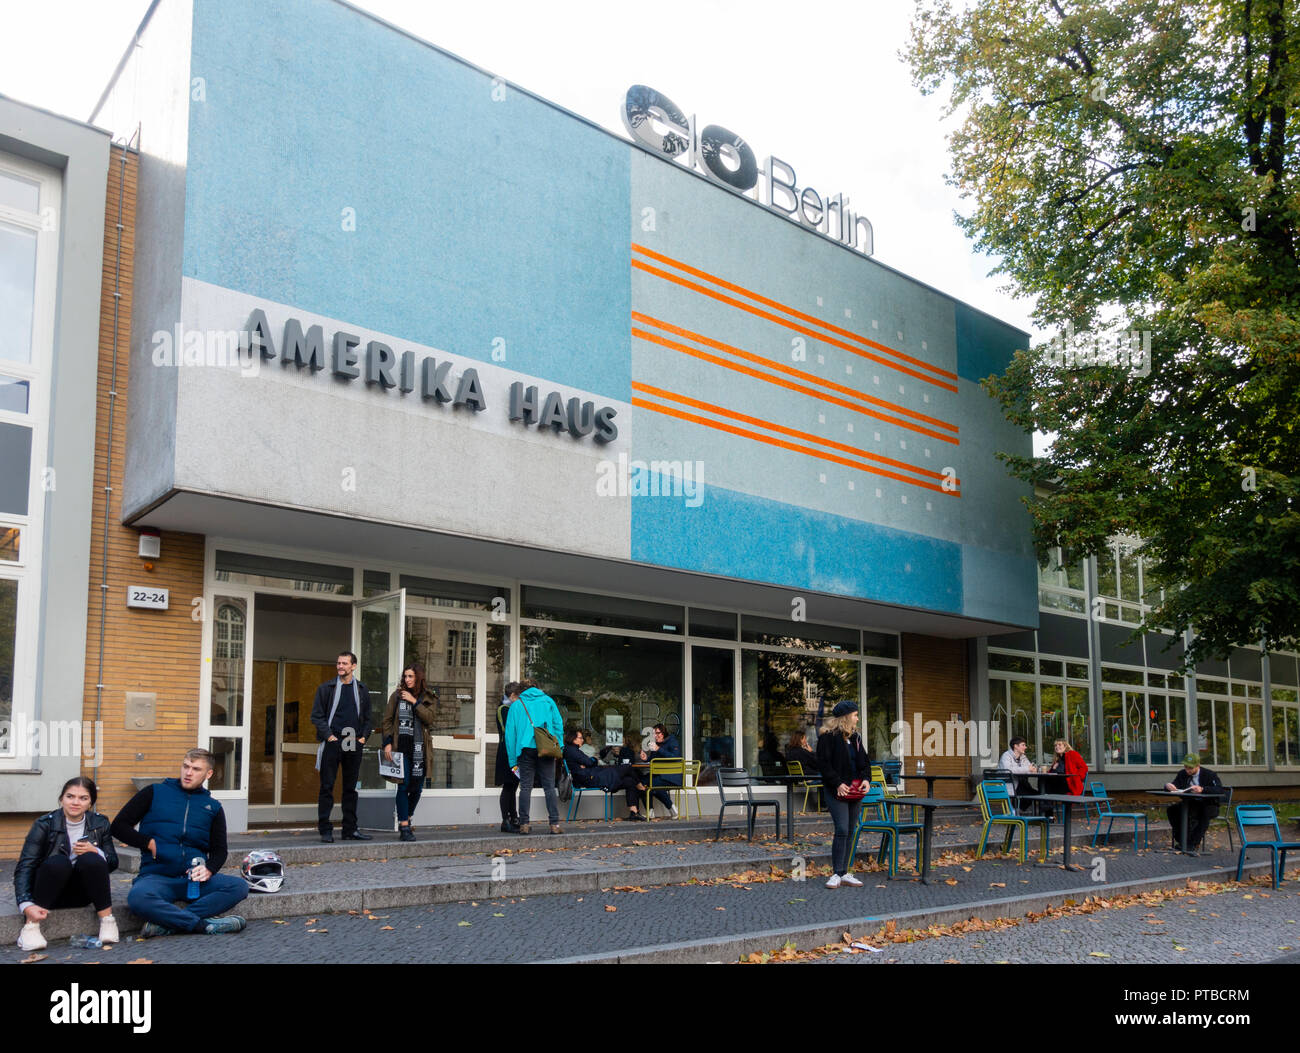 Exterior of CO Berlin photography arts centre at former Amerika Haus in Charlottenburg Berlin, Germany, Stock Photo